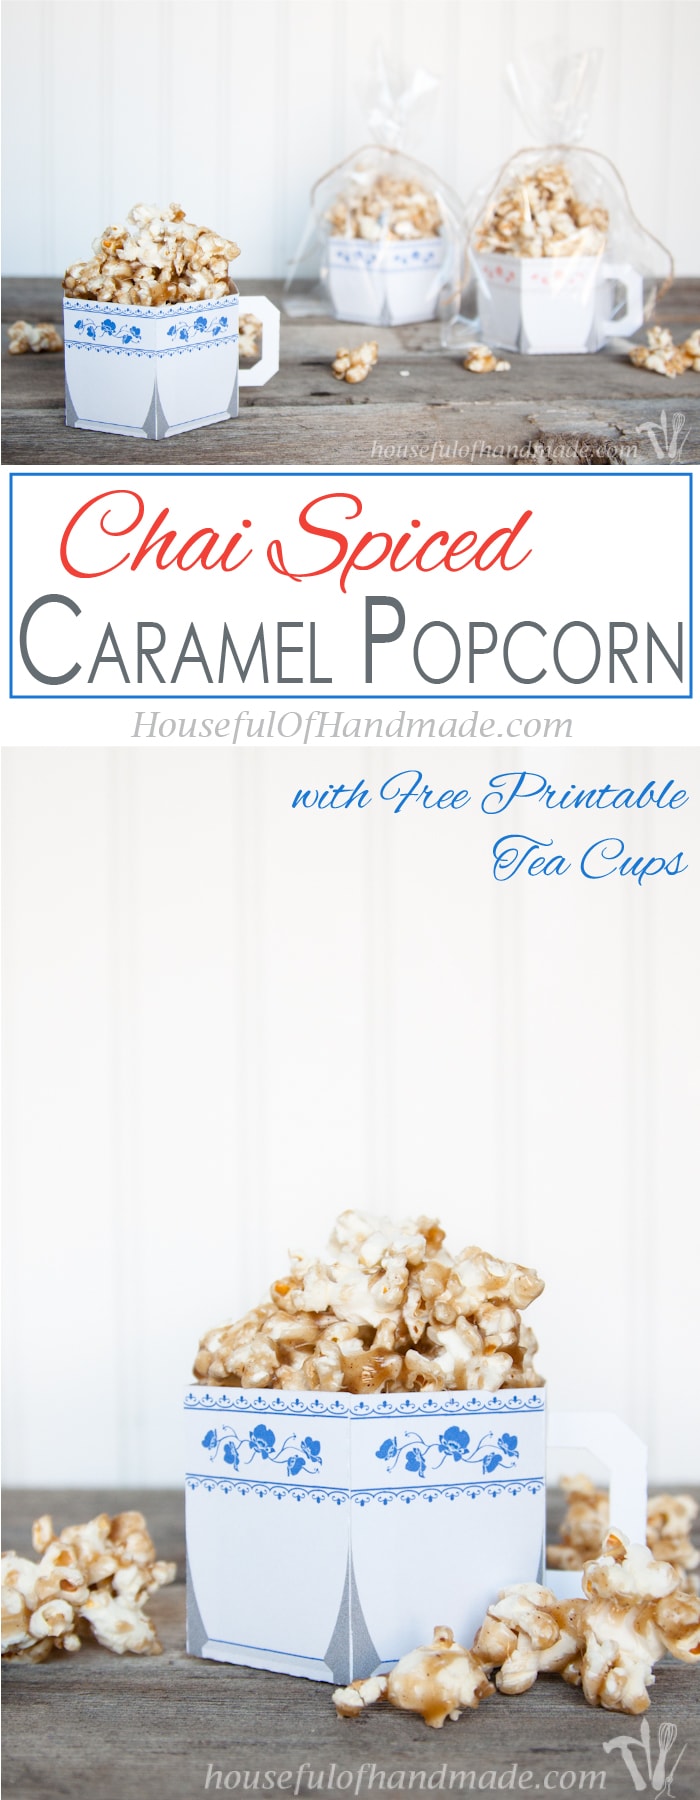 I love Chai tea so why not enjoy it in your caramel popcorn? This Chai Spiced Caramel Popcorn is perfect for girl's night in! Includes free printable paper tea cups for serving you popcorn! | Housefulofhandmade.com